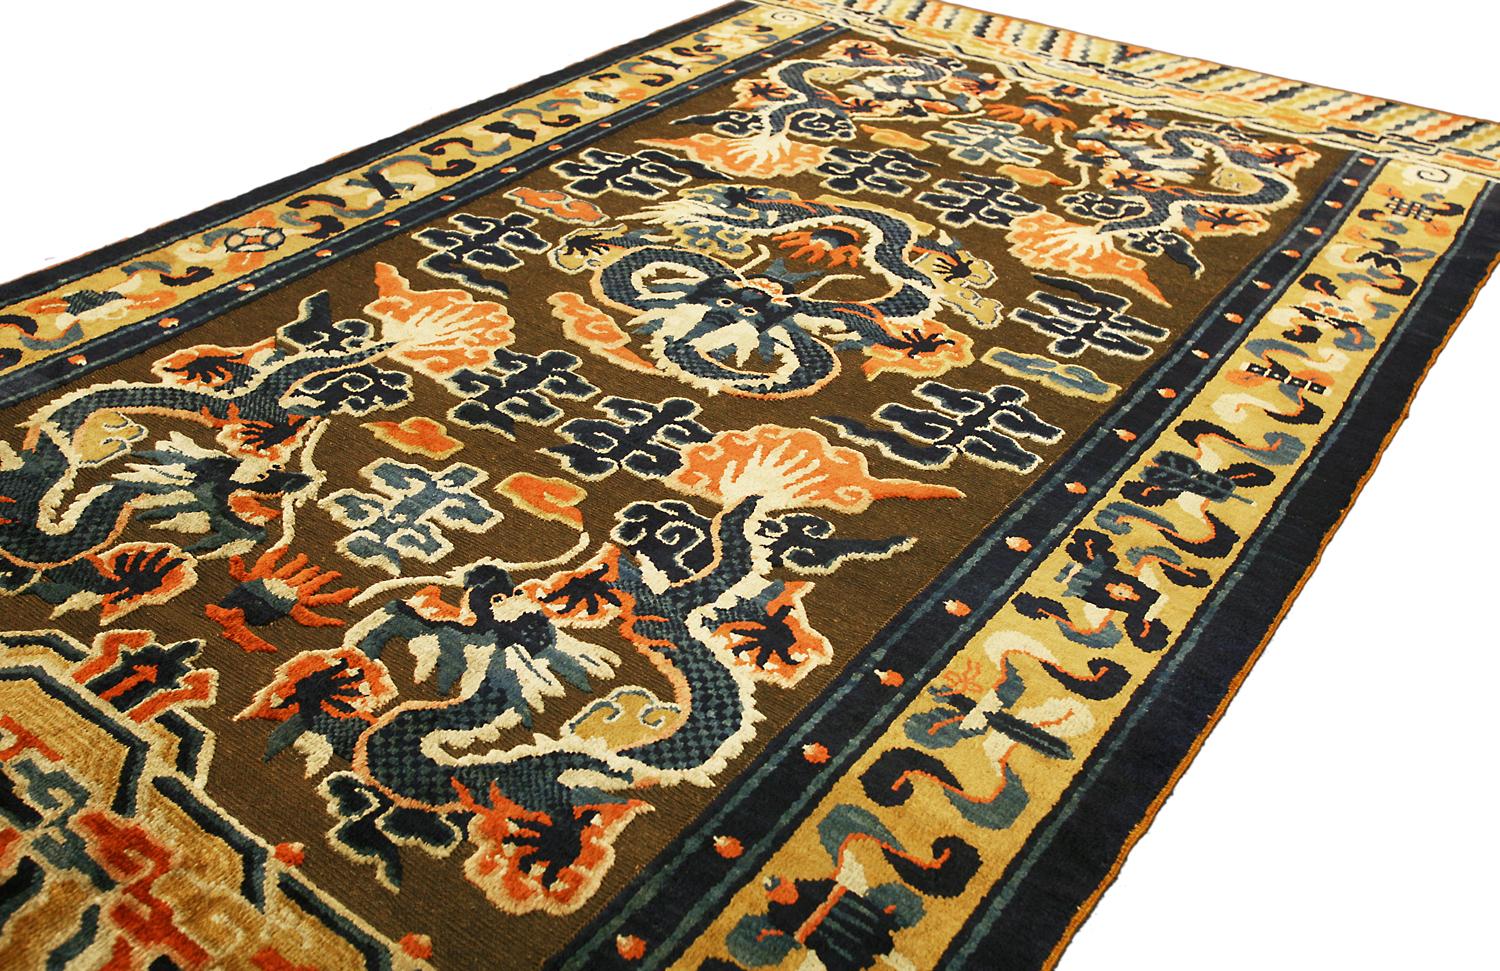 This is a silk souf Ningxia rug woven during the end of the 19th century. It is made of 100% silk pile and the background of the carpet is made using a flat weave technique with metal threads. The design of the rug is a central dragon with five